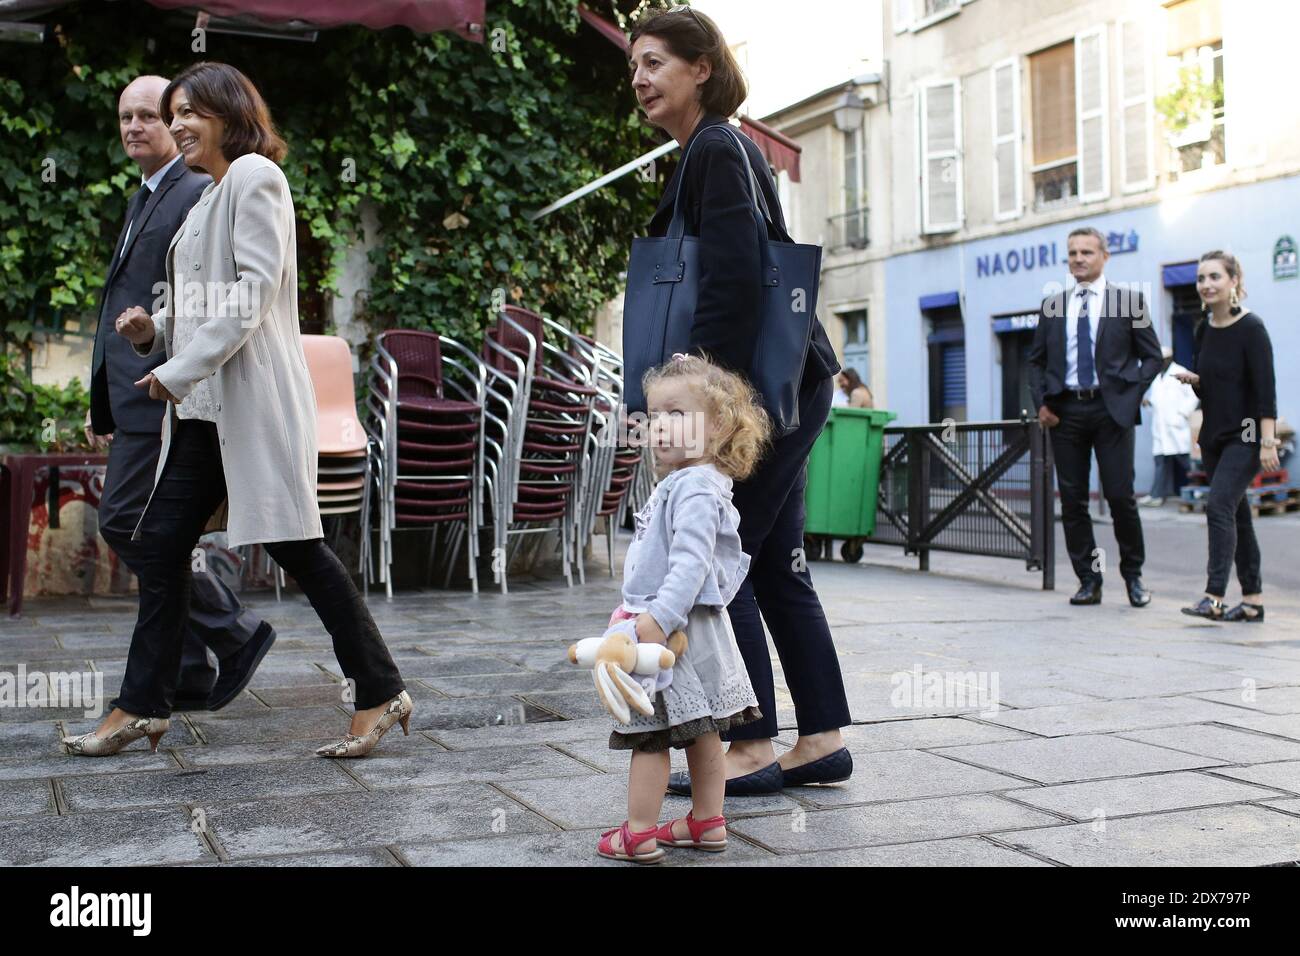 A mother with her daughter arrive next to Paris Mayor Anne Hidalgo and Paris Mayor district 4th, Christophe Girard to the start of the new school year (rentree scolaire) in the 4th district of Paris, France, on September 02, 2014. Photo by Stephane Lemouton/ABACAPRESS.COM Stock Photo